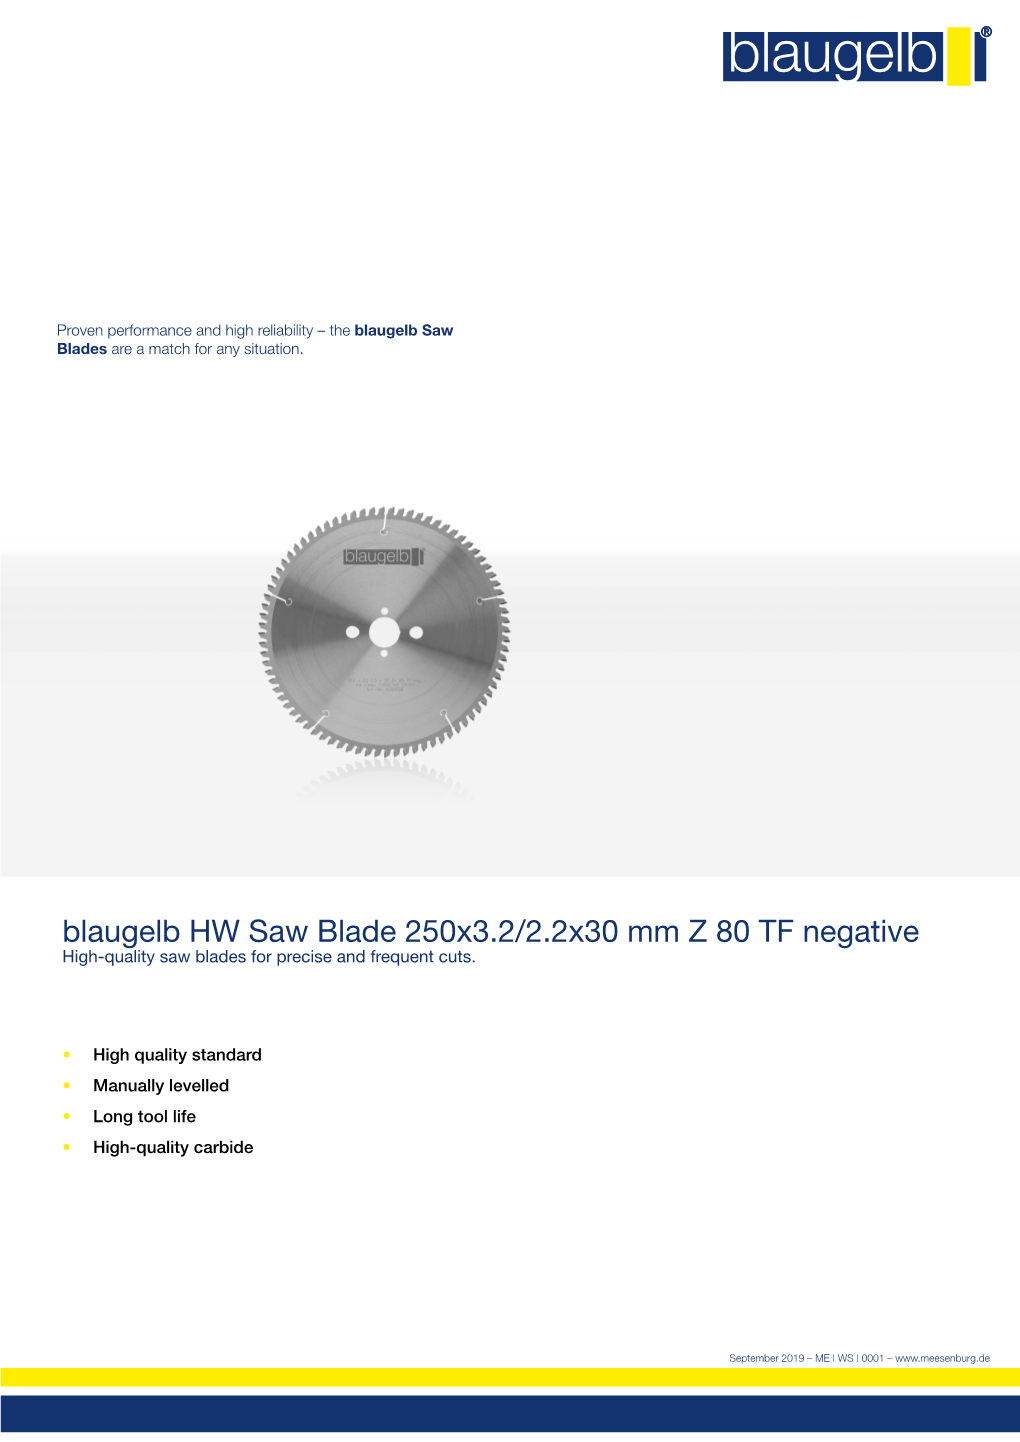 Blaugelb HW Saw Blade 250X3.2/2.2X30 Mm Z 80 TF Negative High-Quality Saw Blades for Precise and Frequent Cuts